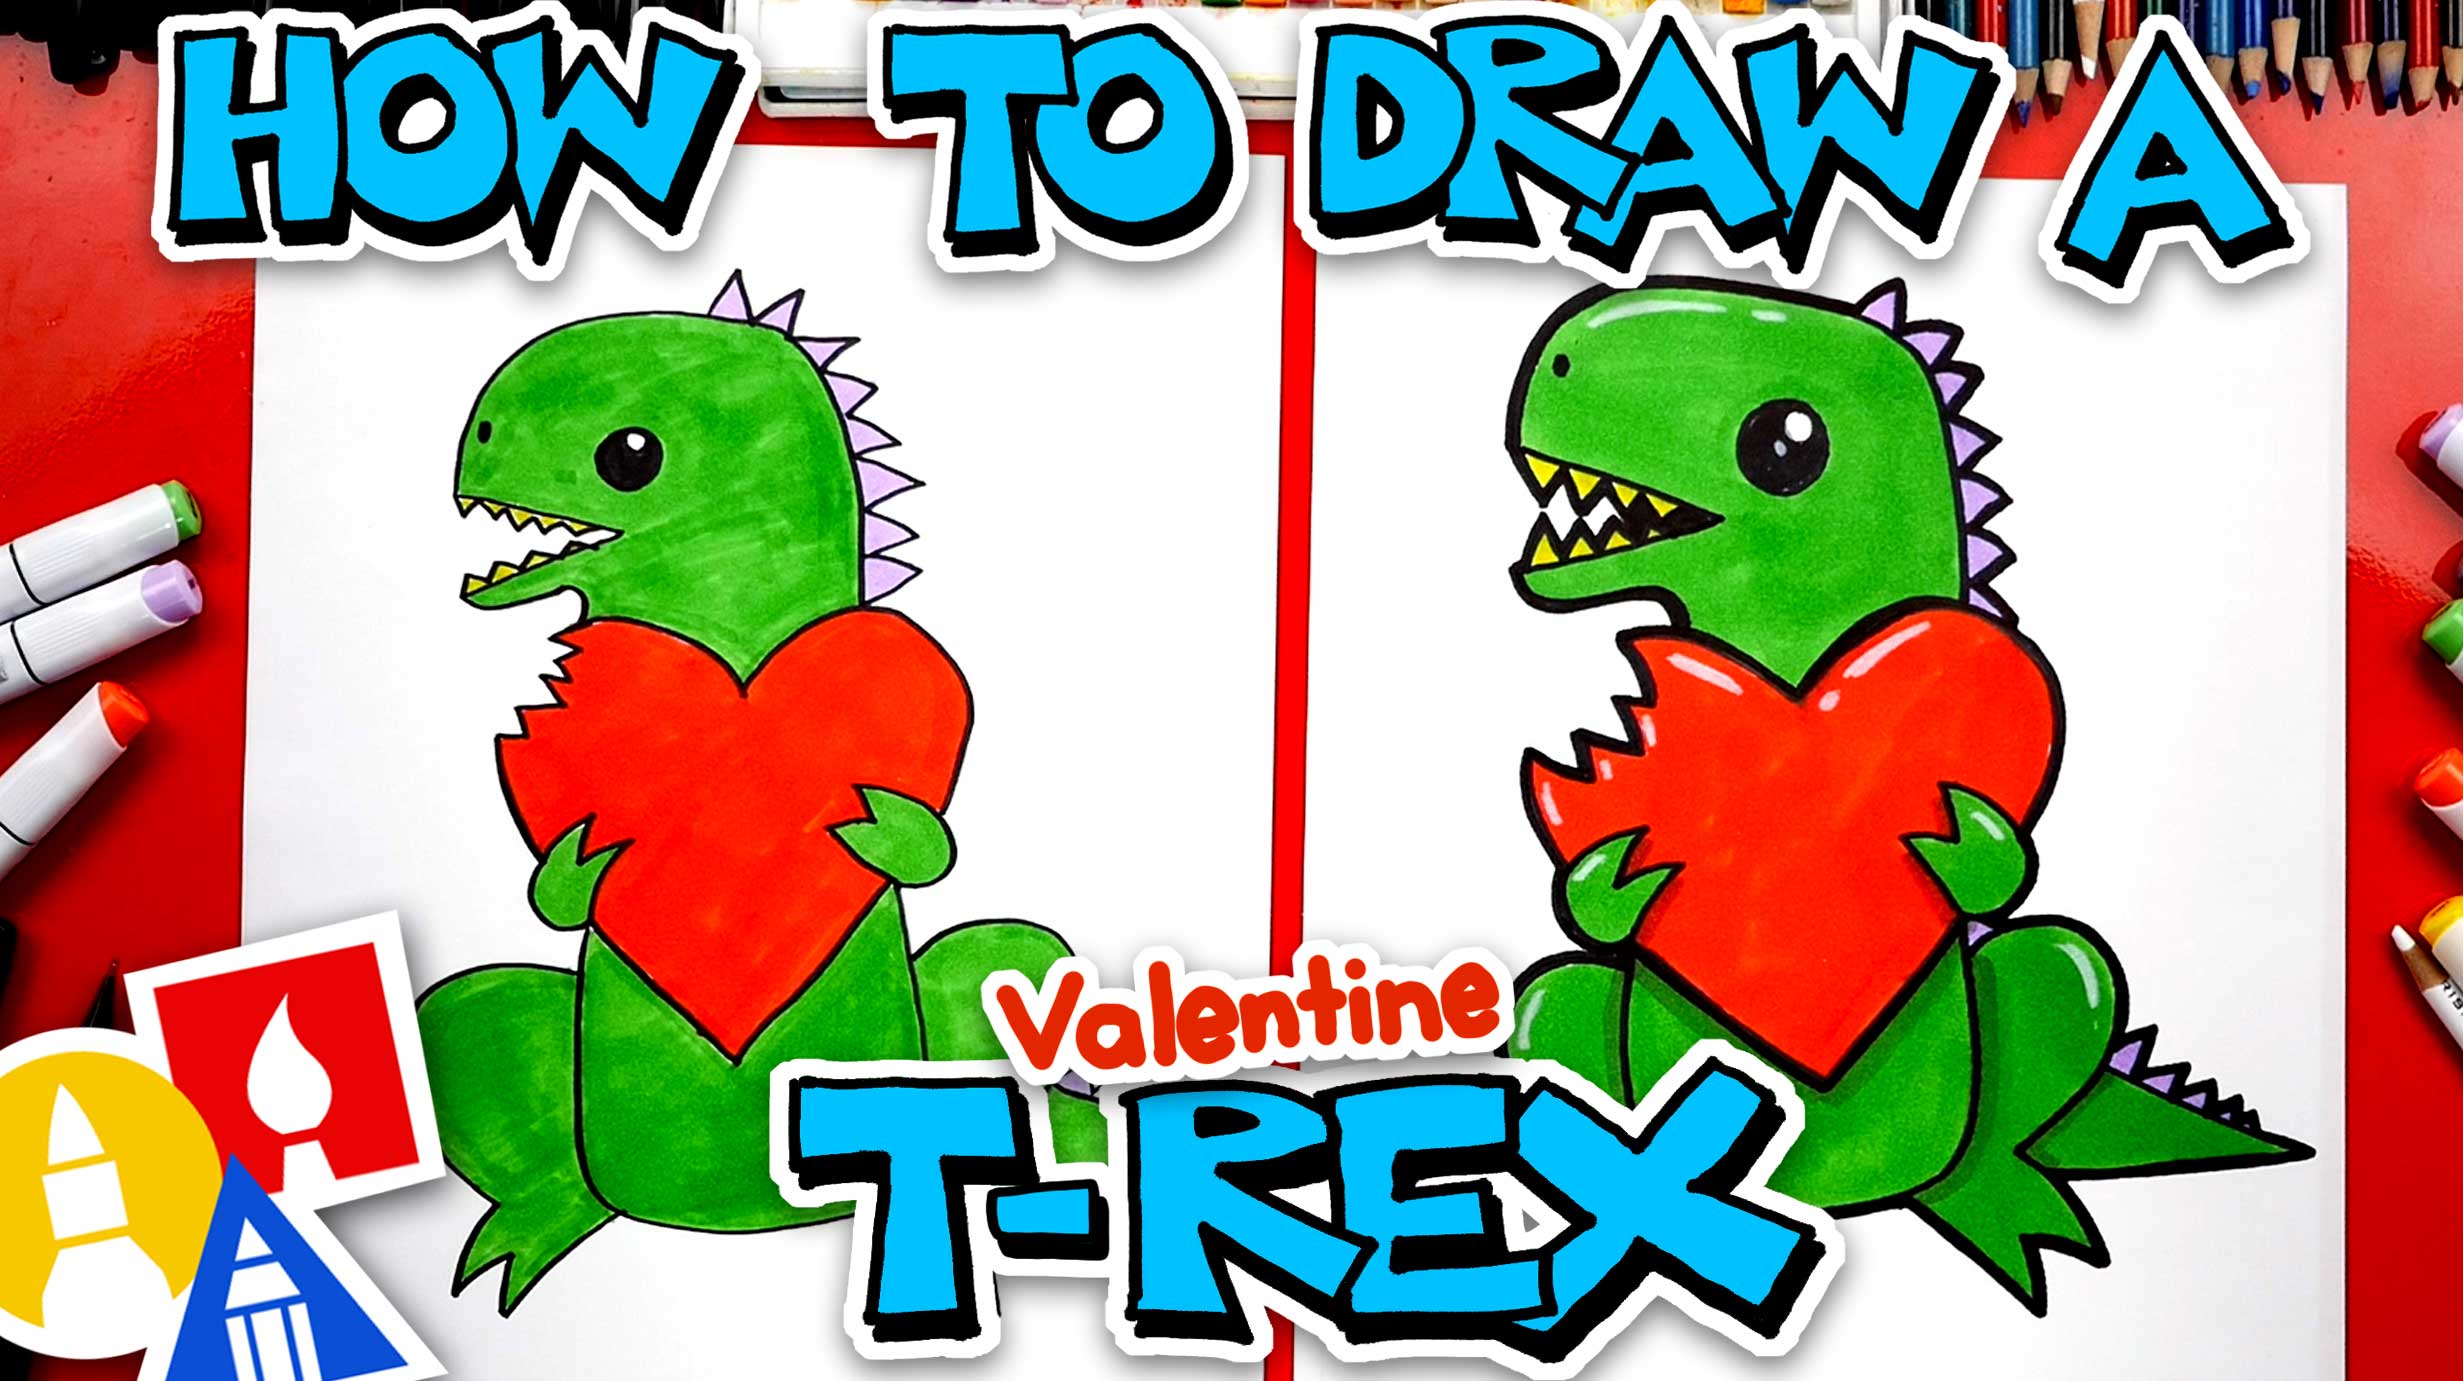 How To Draw A Funny Valentine TRex Art For Kids Hub